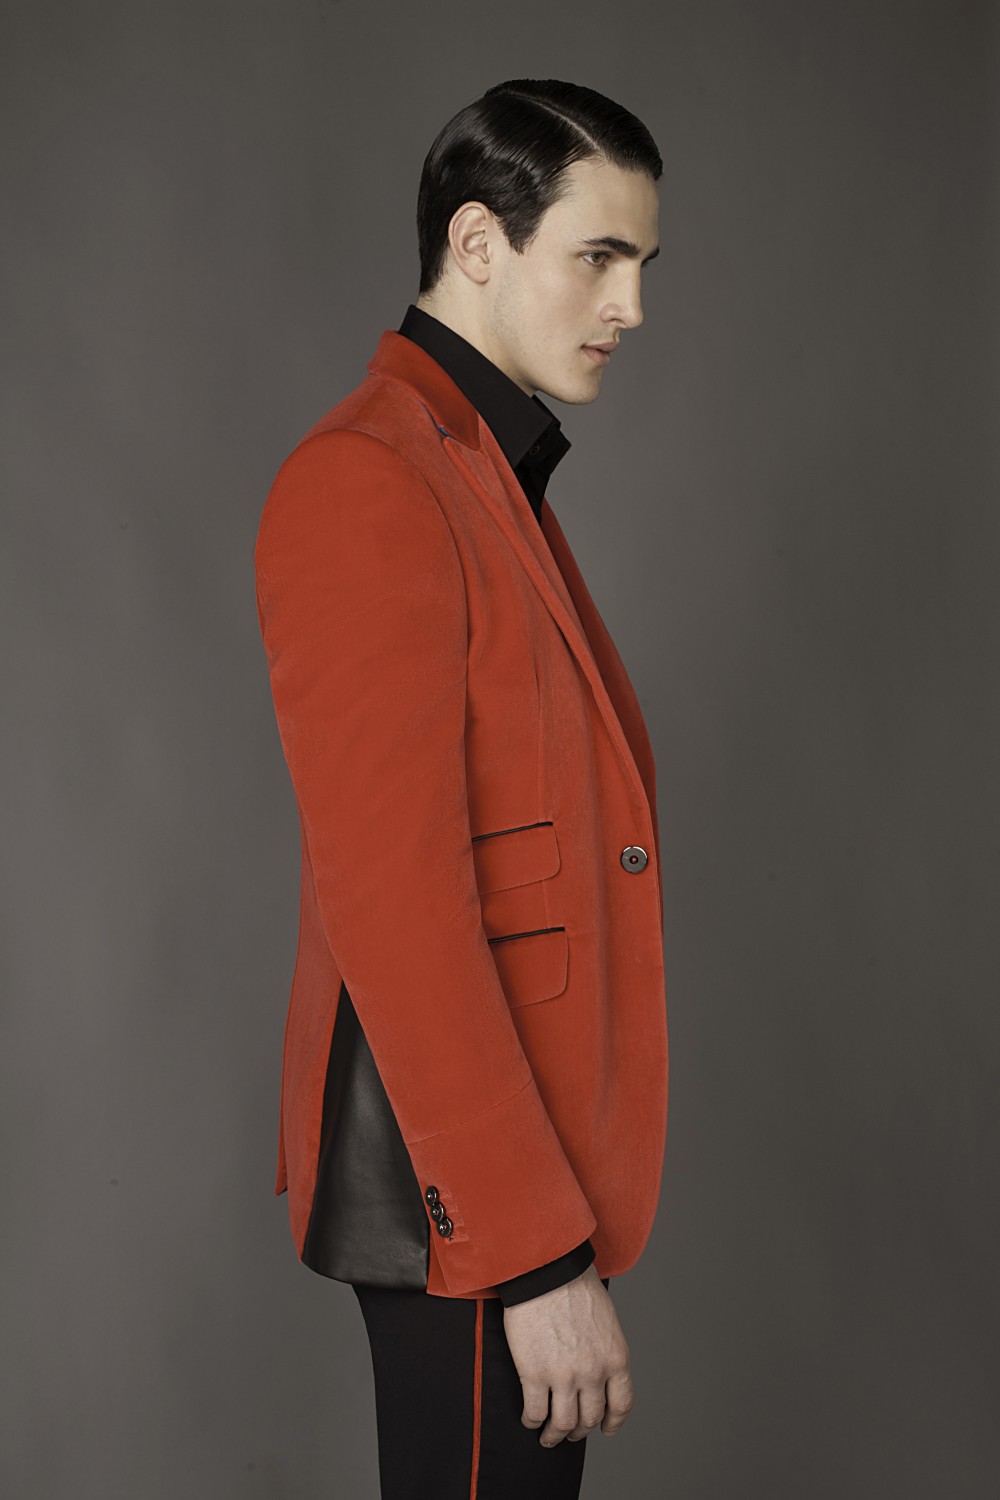 Colour: Red - Black
Fabric: Cotton velvet - Leather
Lining: Viscose